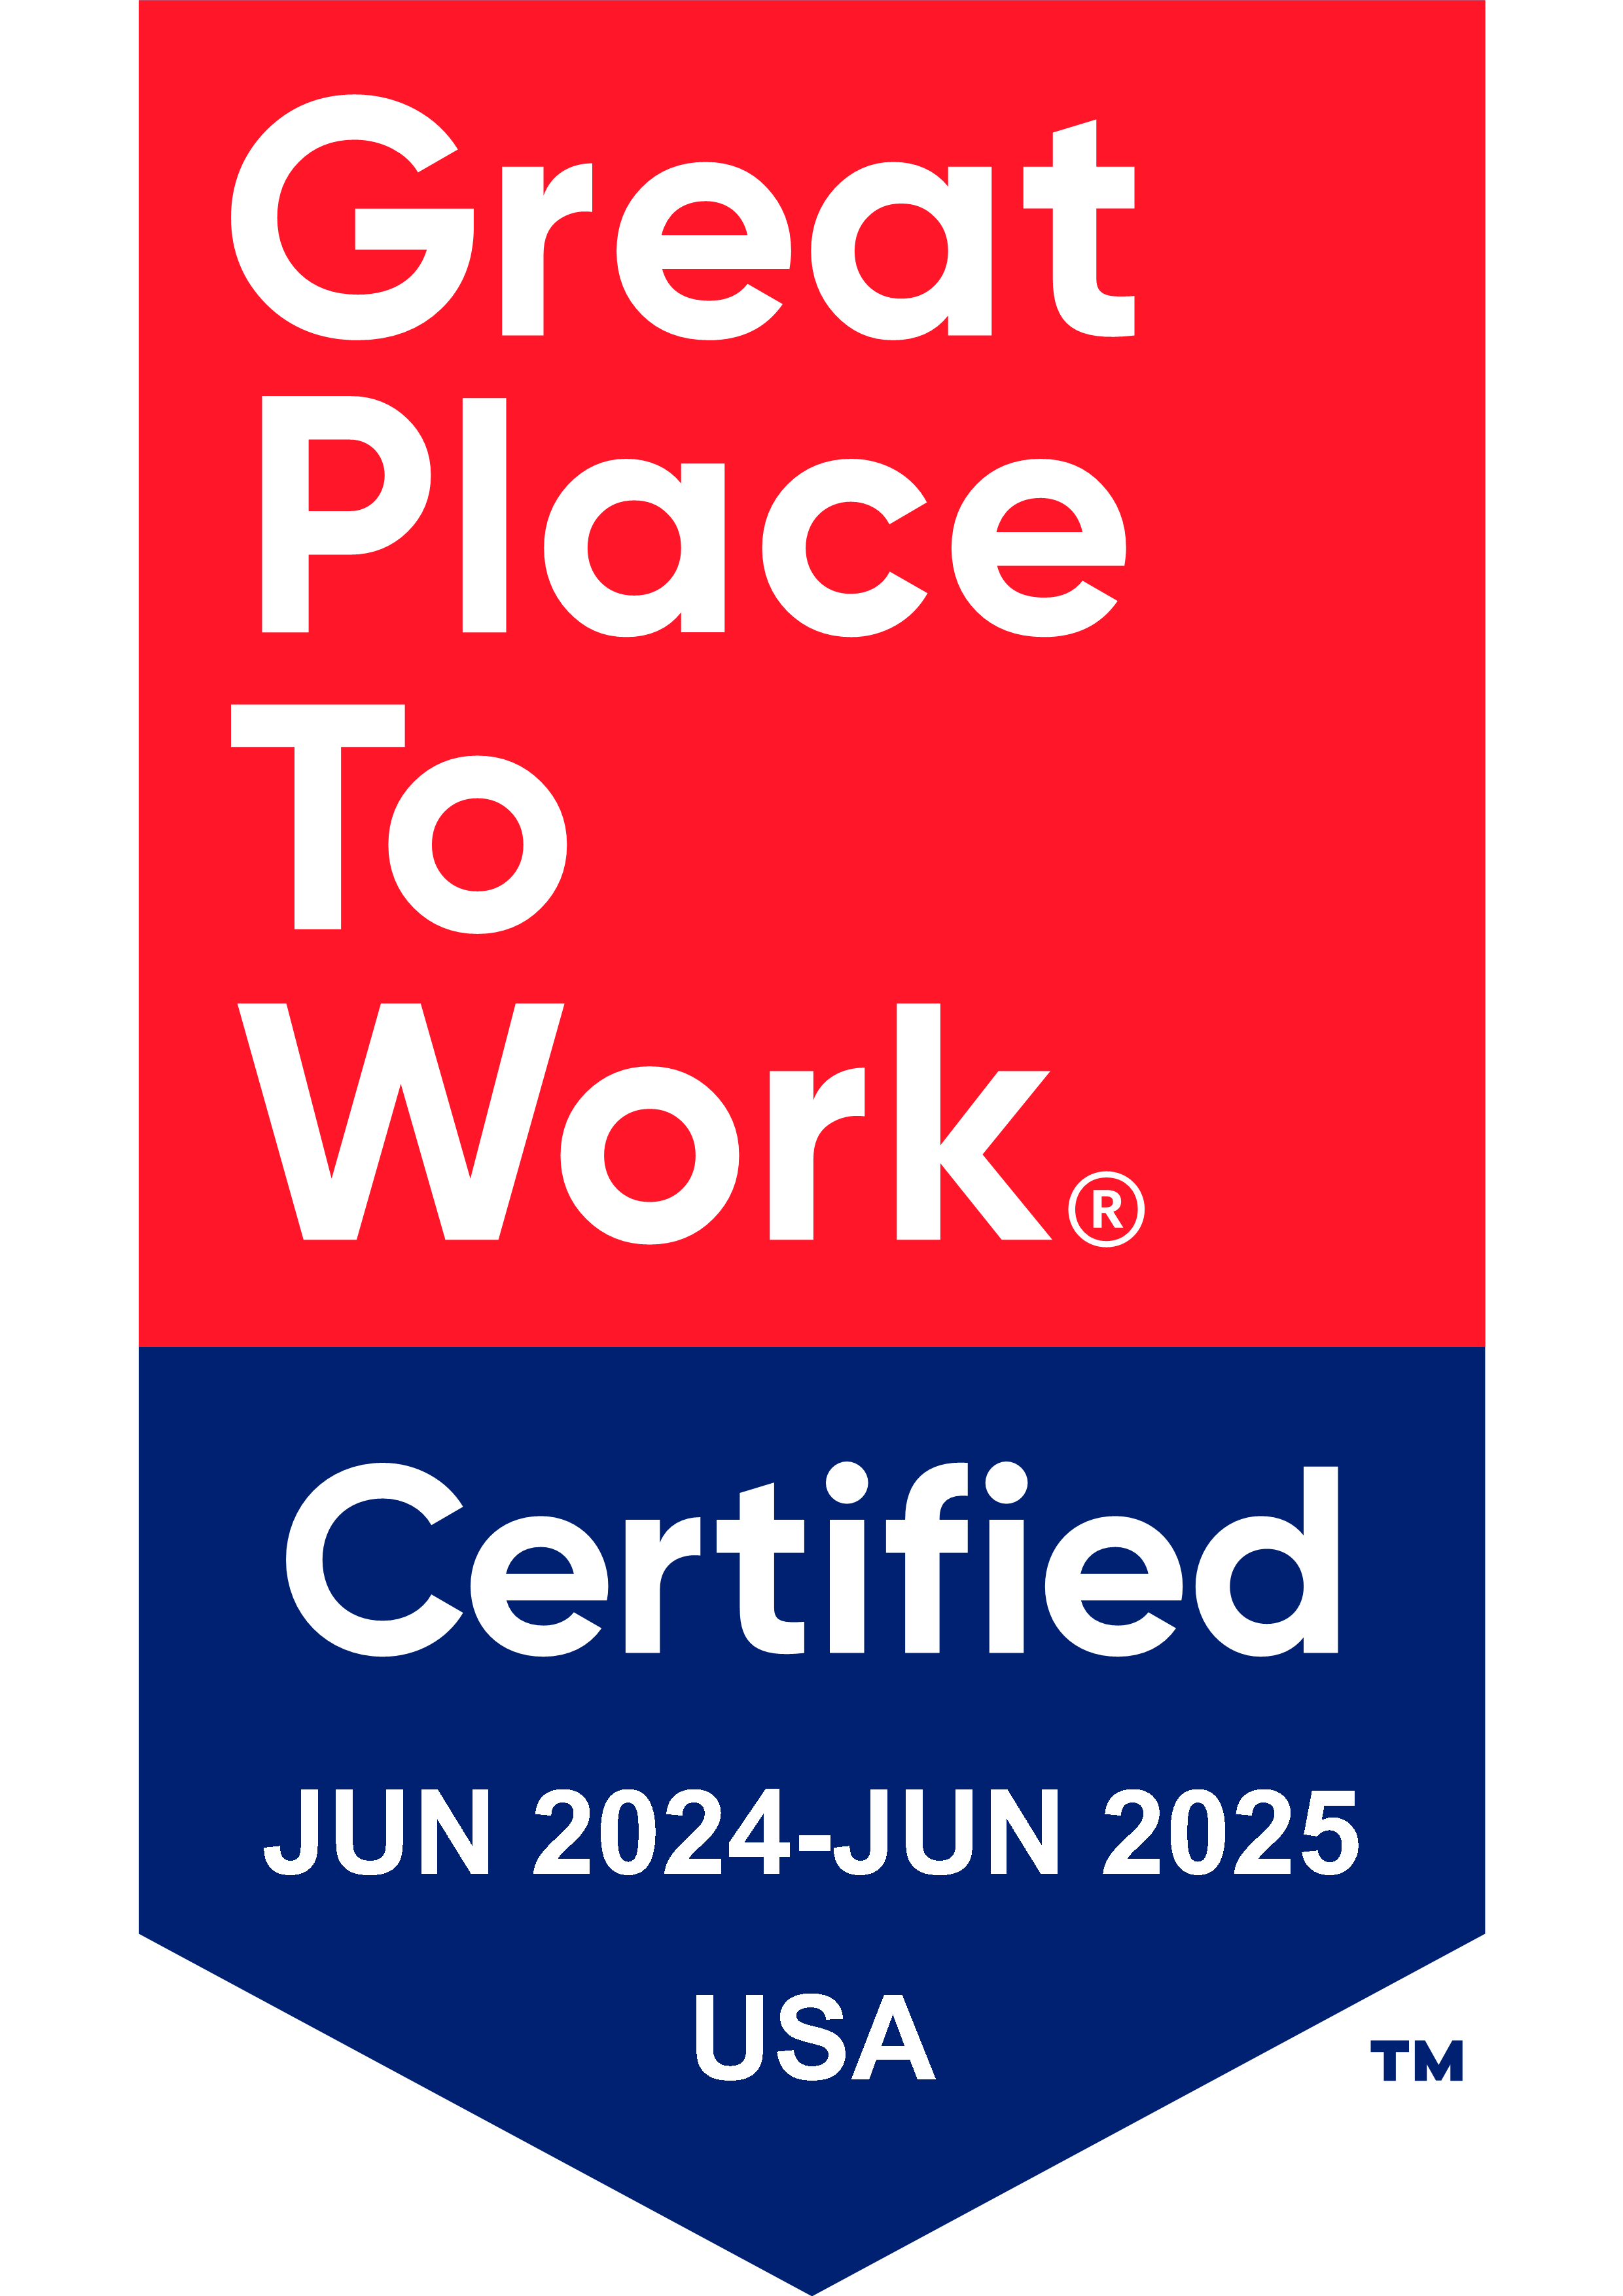 Great Place to Work Certified June 2024-June 2025 USA